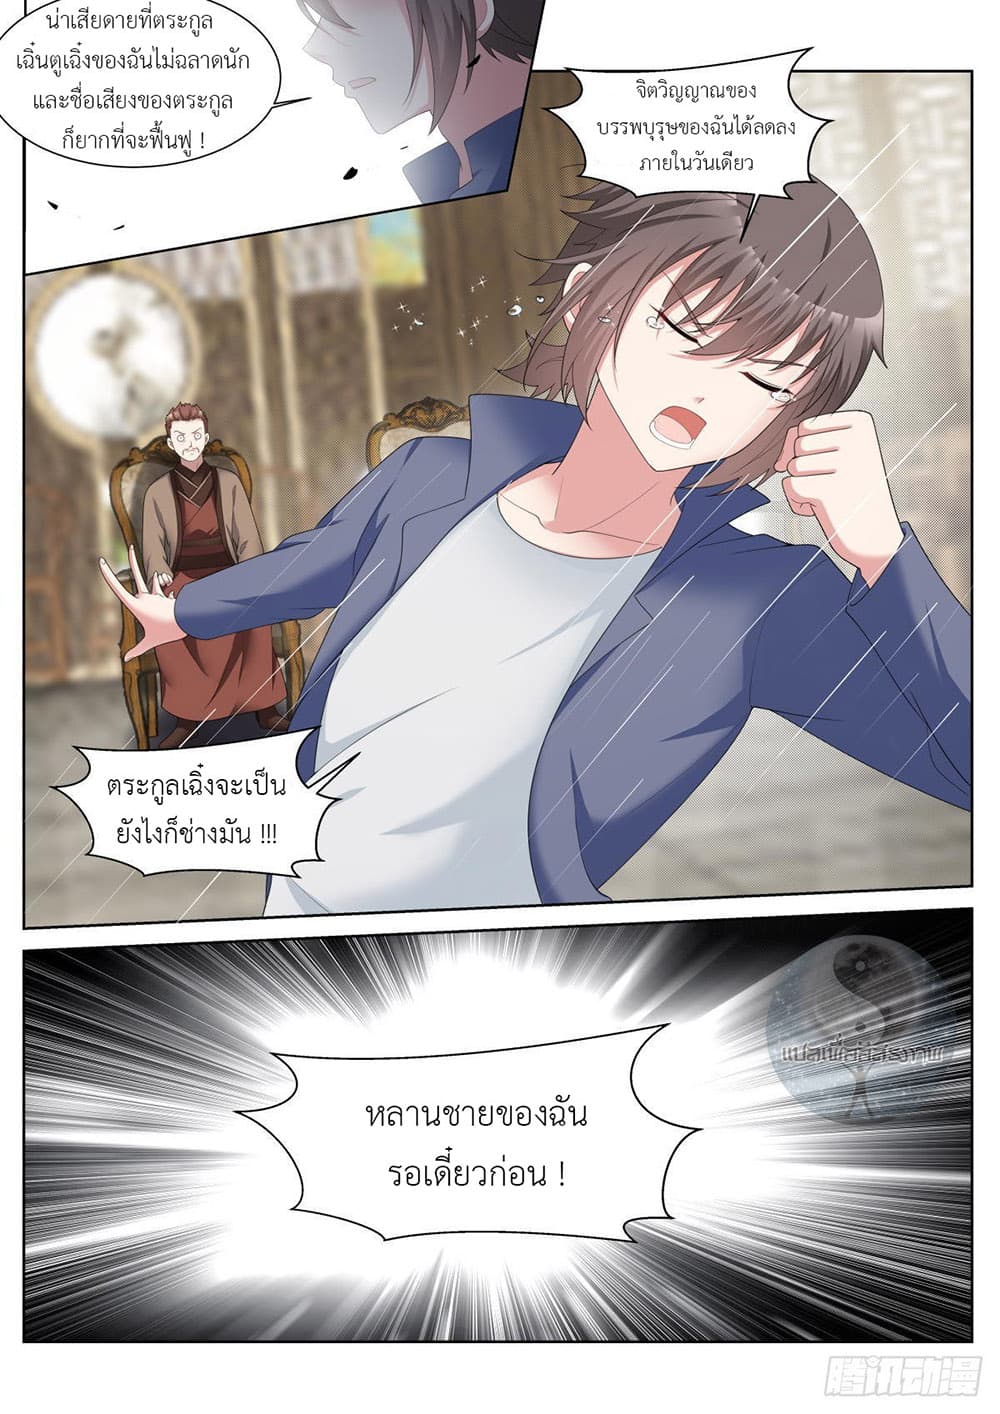 Miss, Something's Wrong With You สาวน้อยคุณคิดผิดแล้ว 38-38